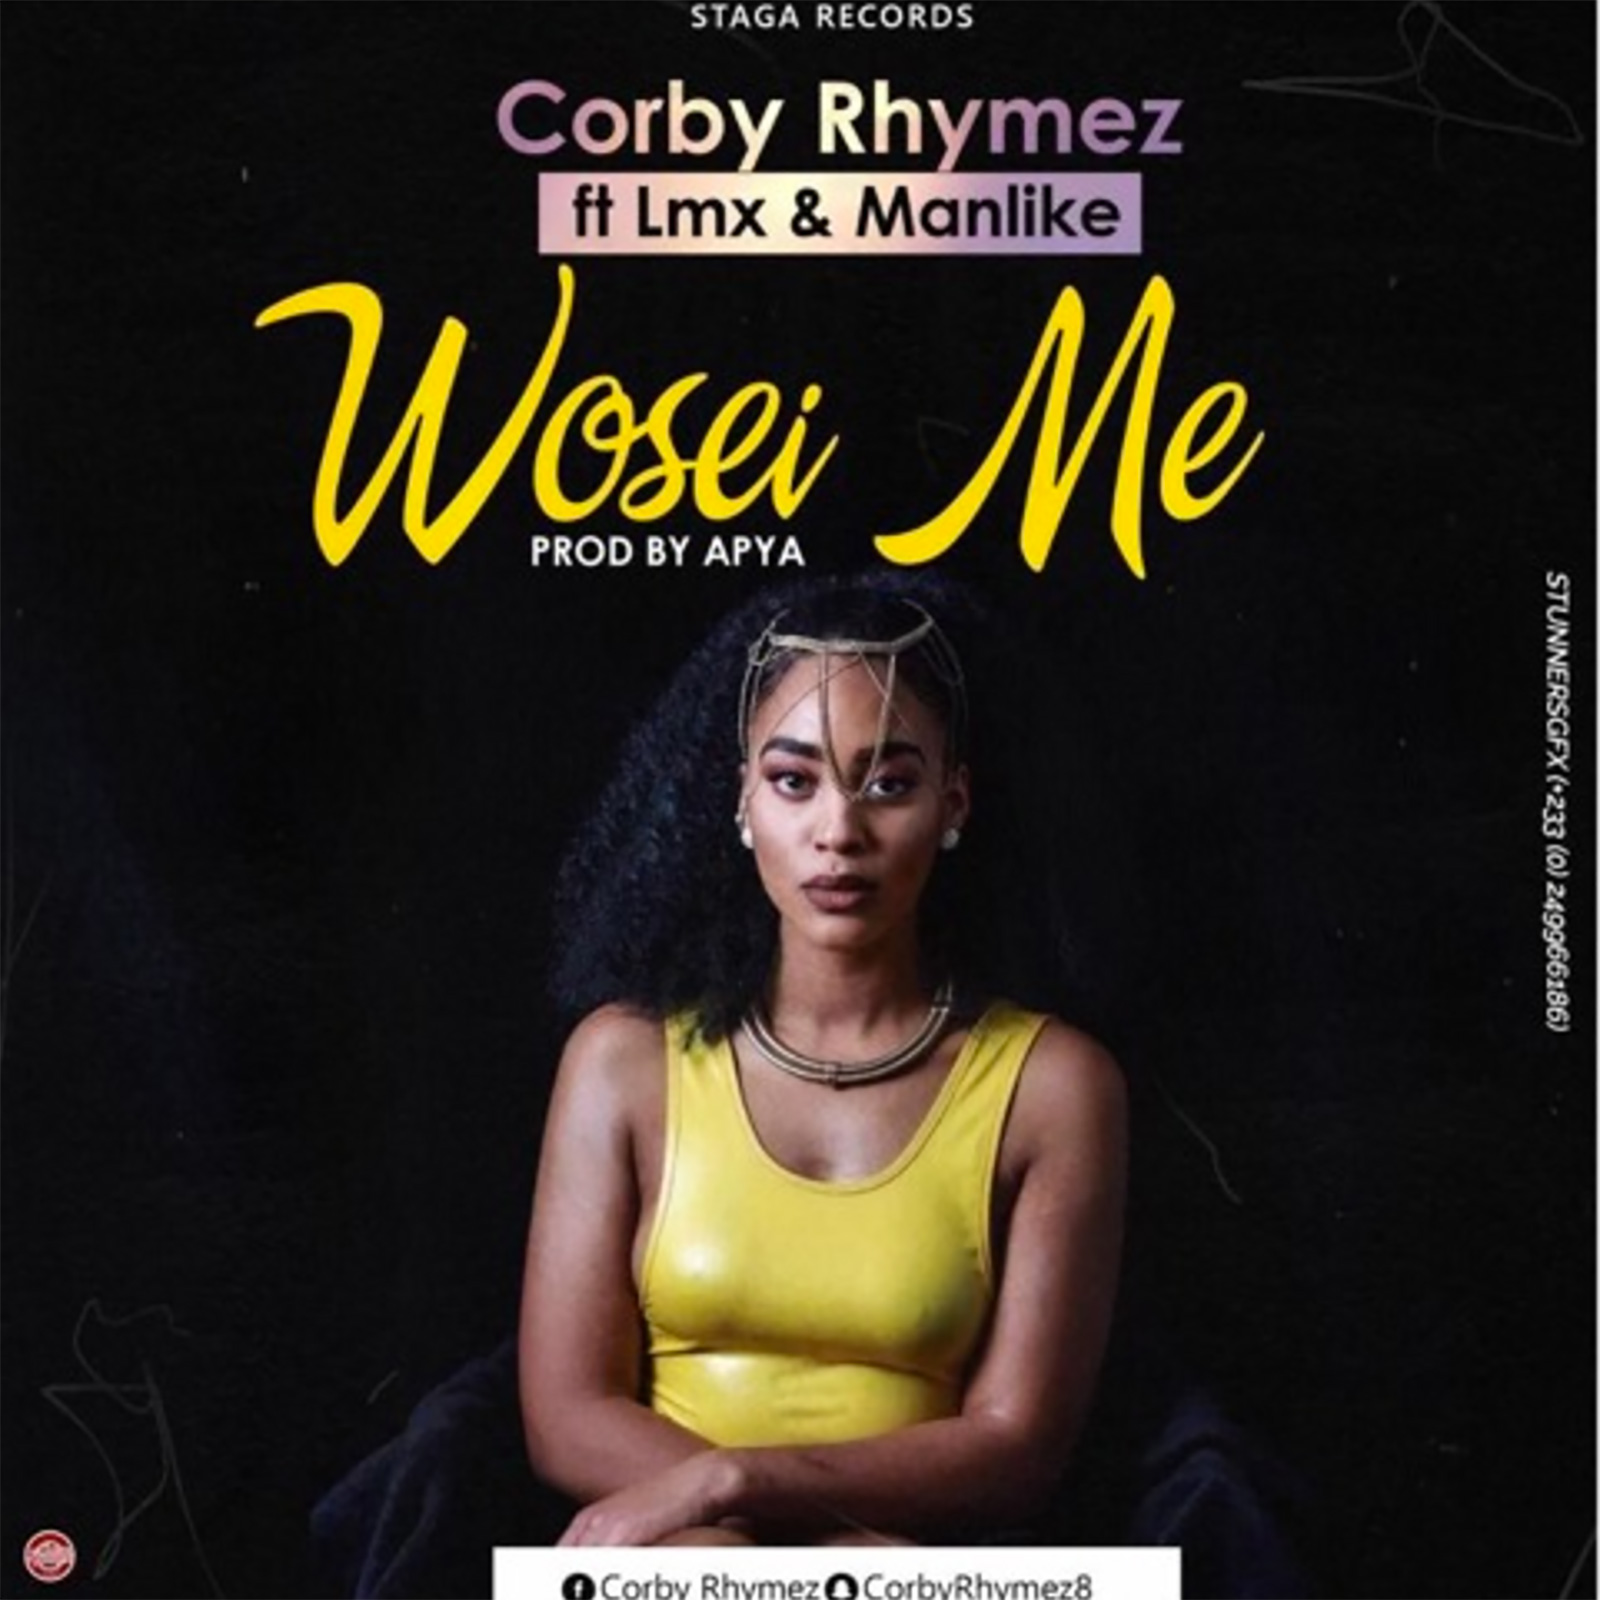 Wosei Me by Corby Rhymez feat. LMX & Manlike